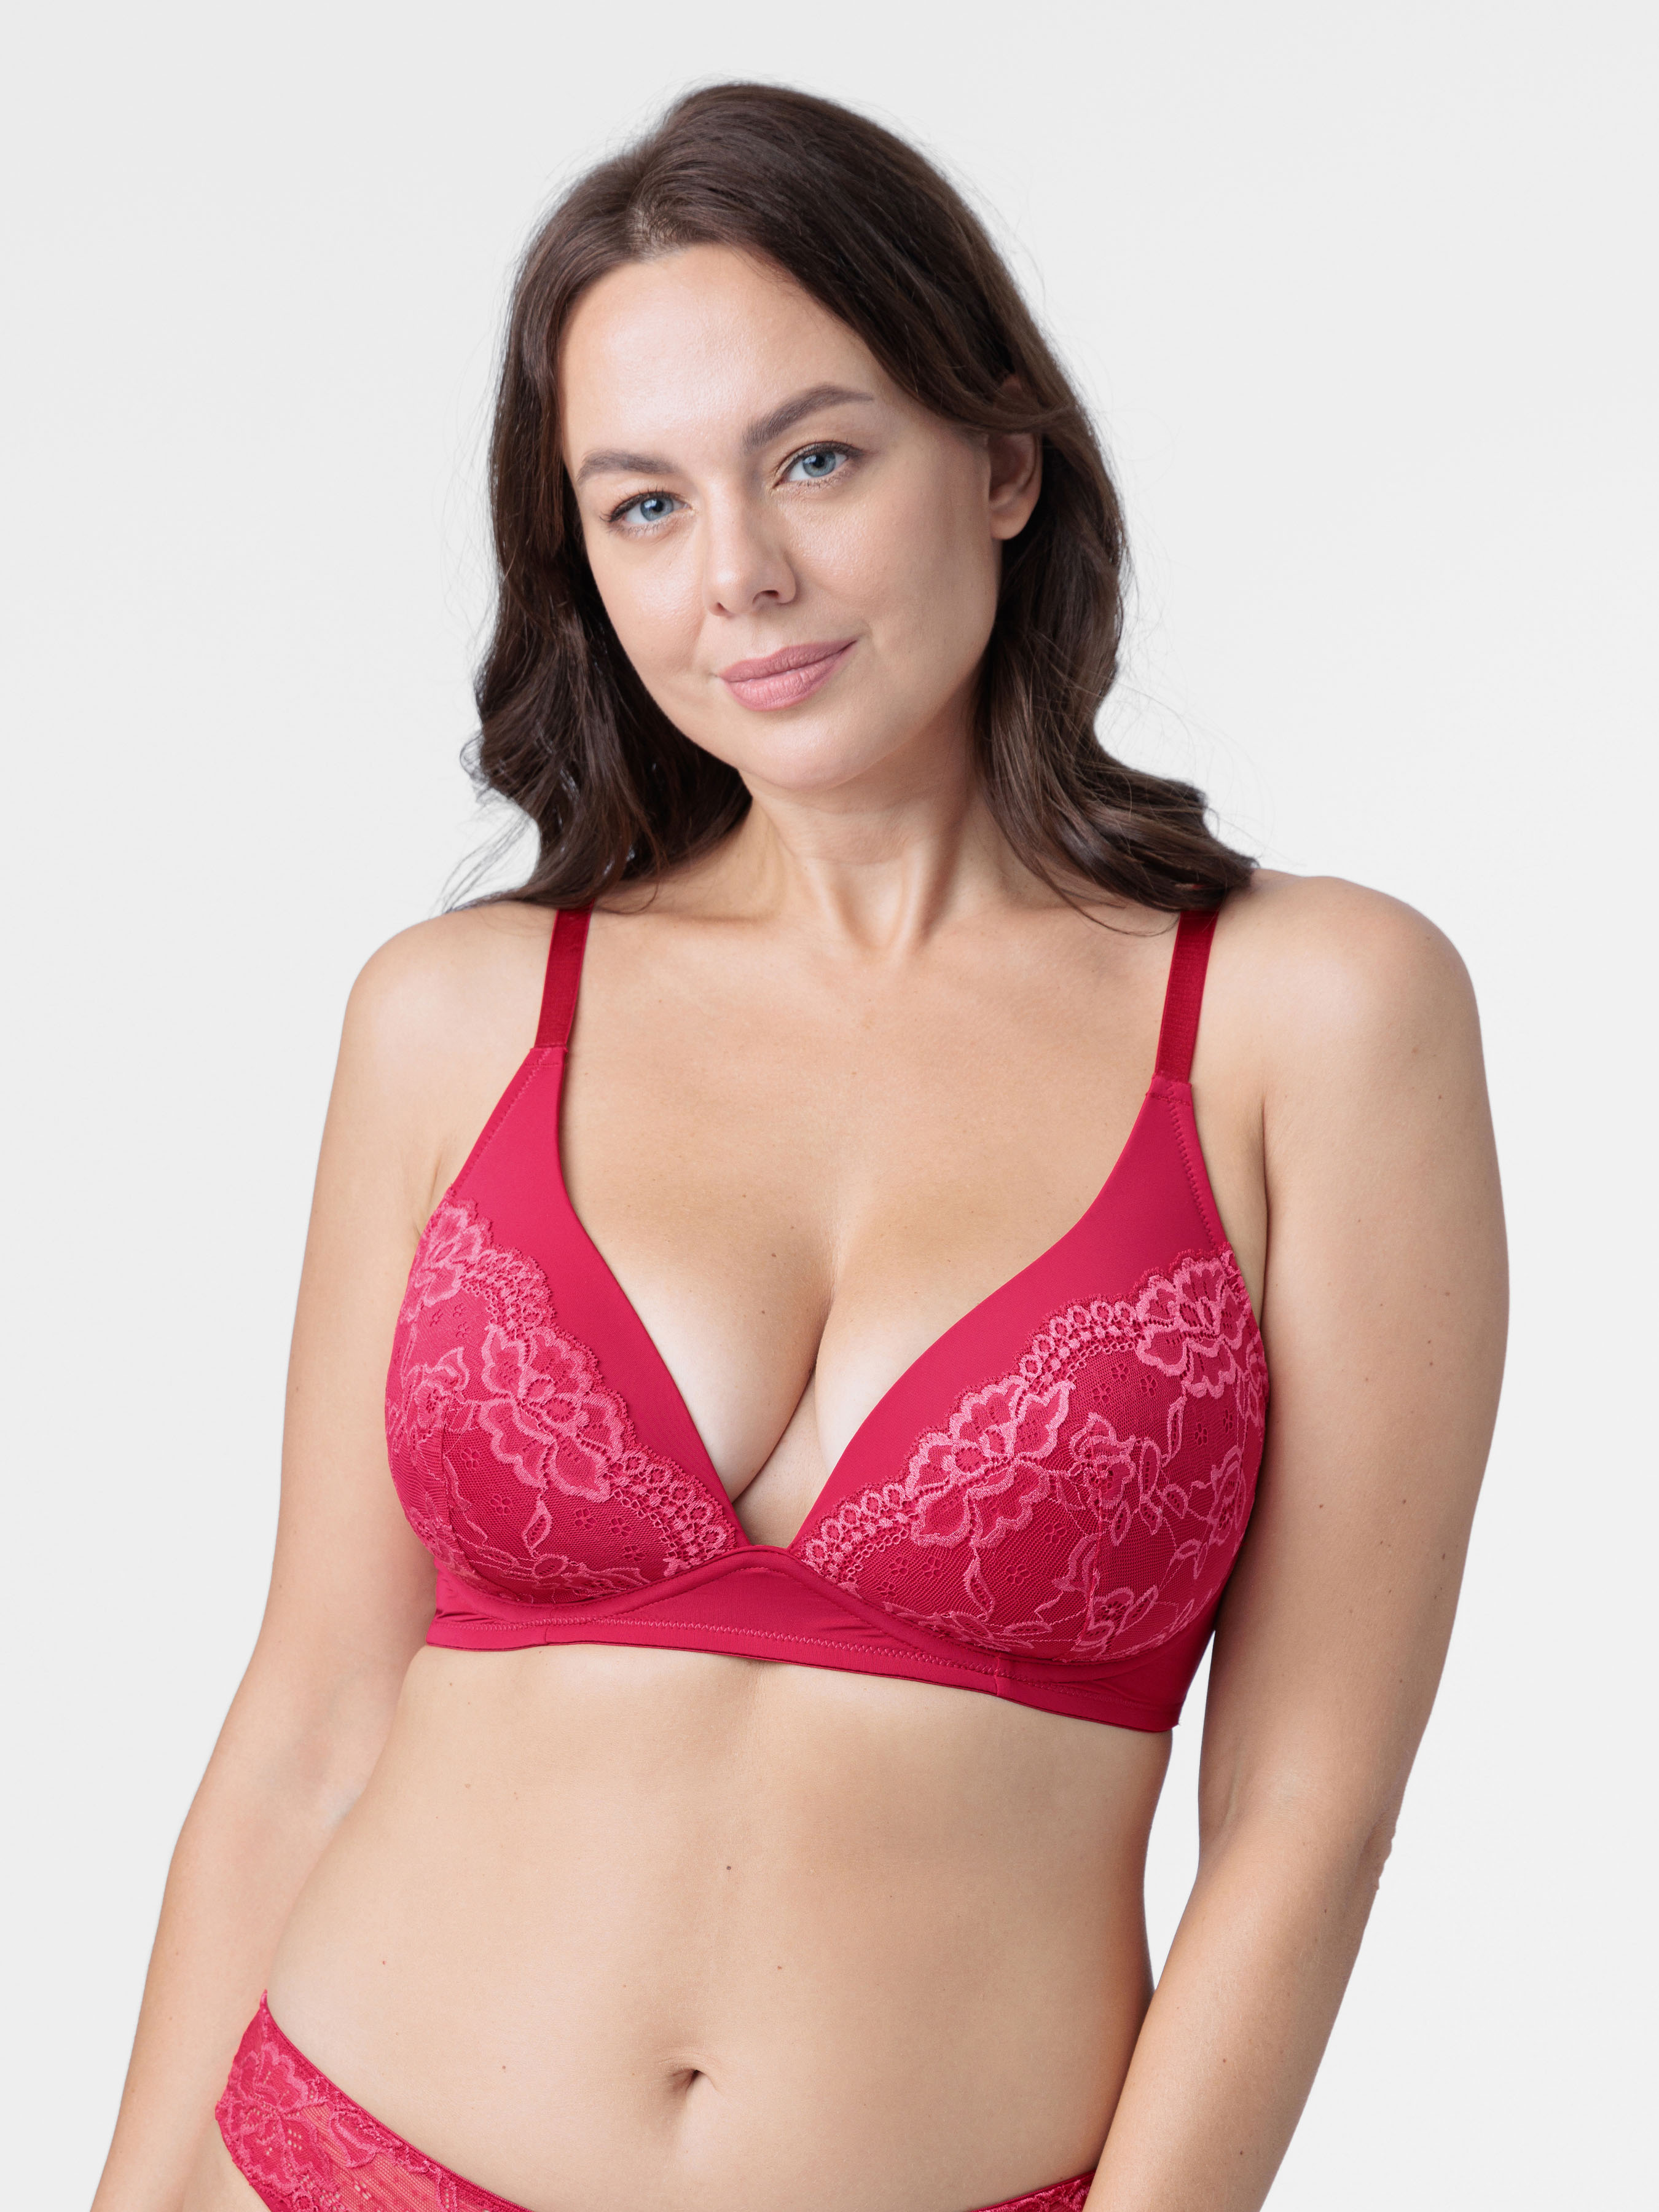 full cup bra, underwired, non padded lianne, dorina. limited edition.